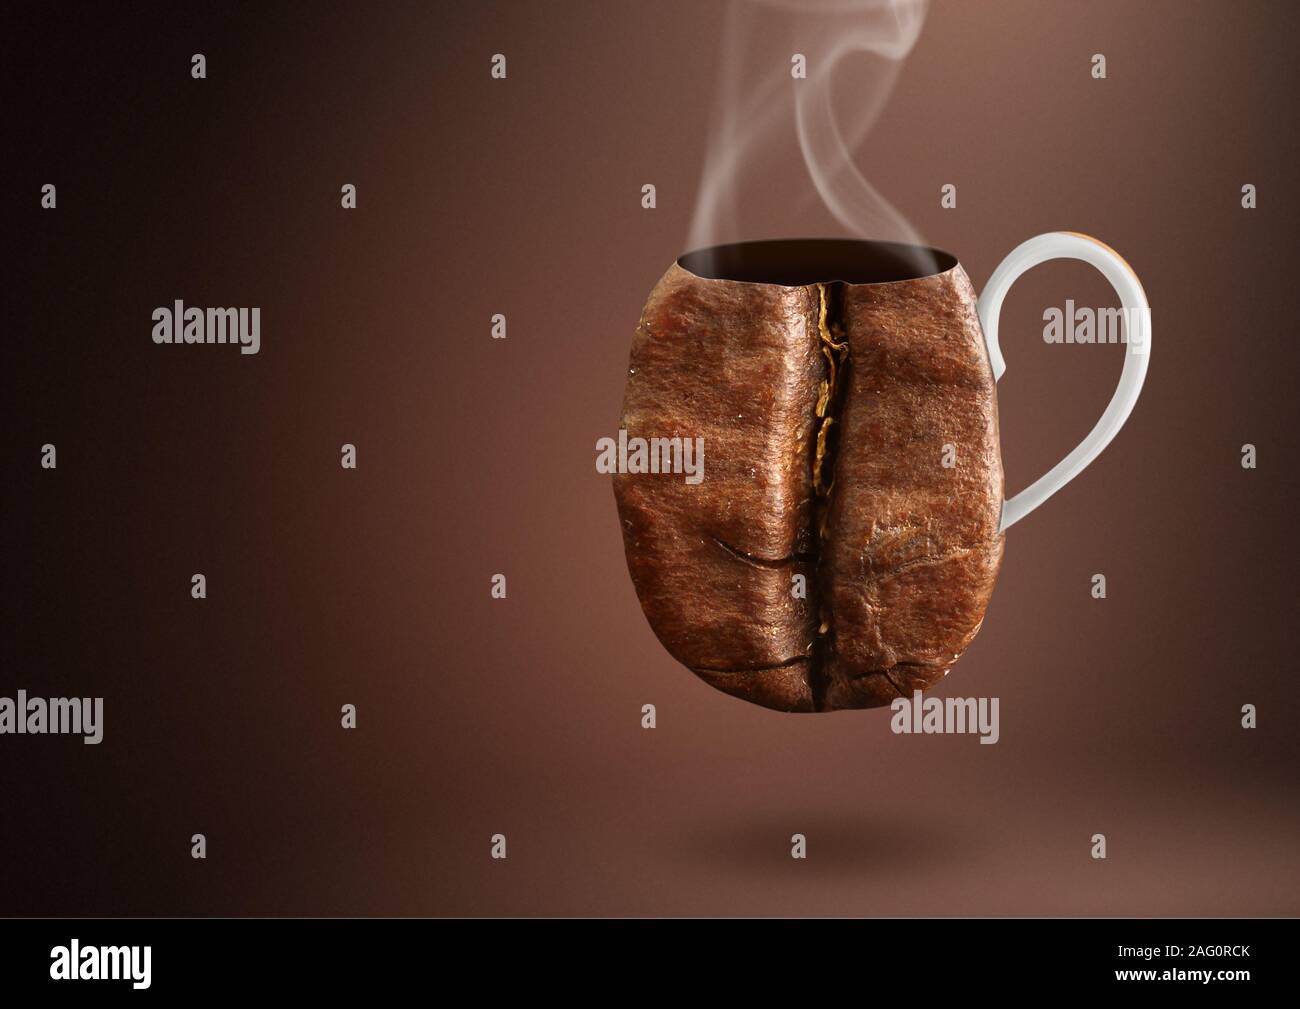 Coffee creative concept, grain as cup of coffee with steam Stock Photo